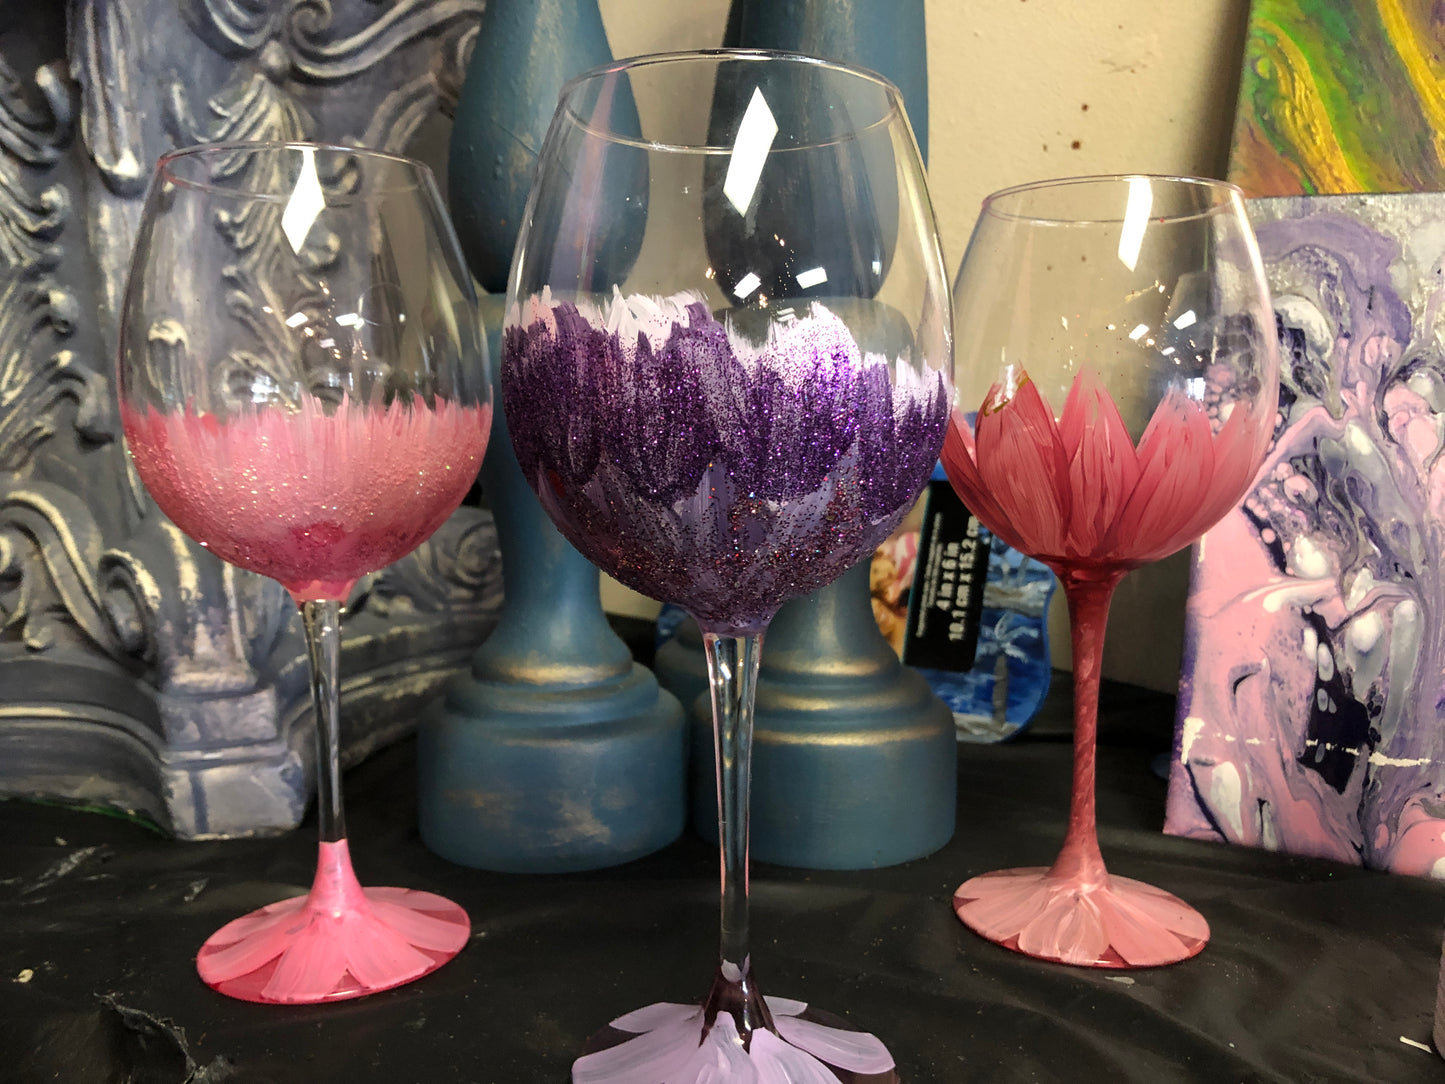 Thu, Jun 13, 5-8pm "Drinks & Designs" Houston Wine & Painting Party